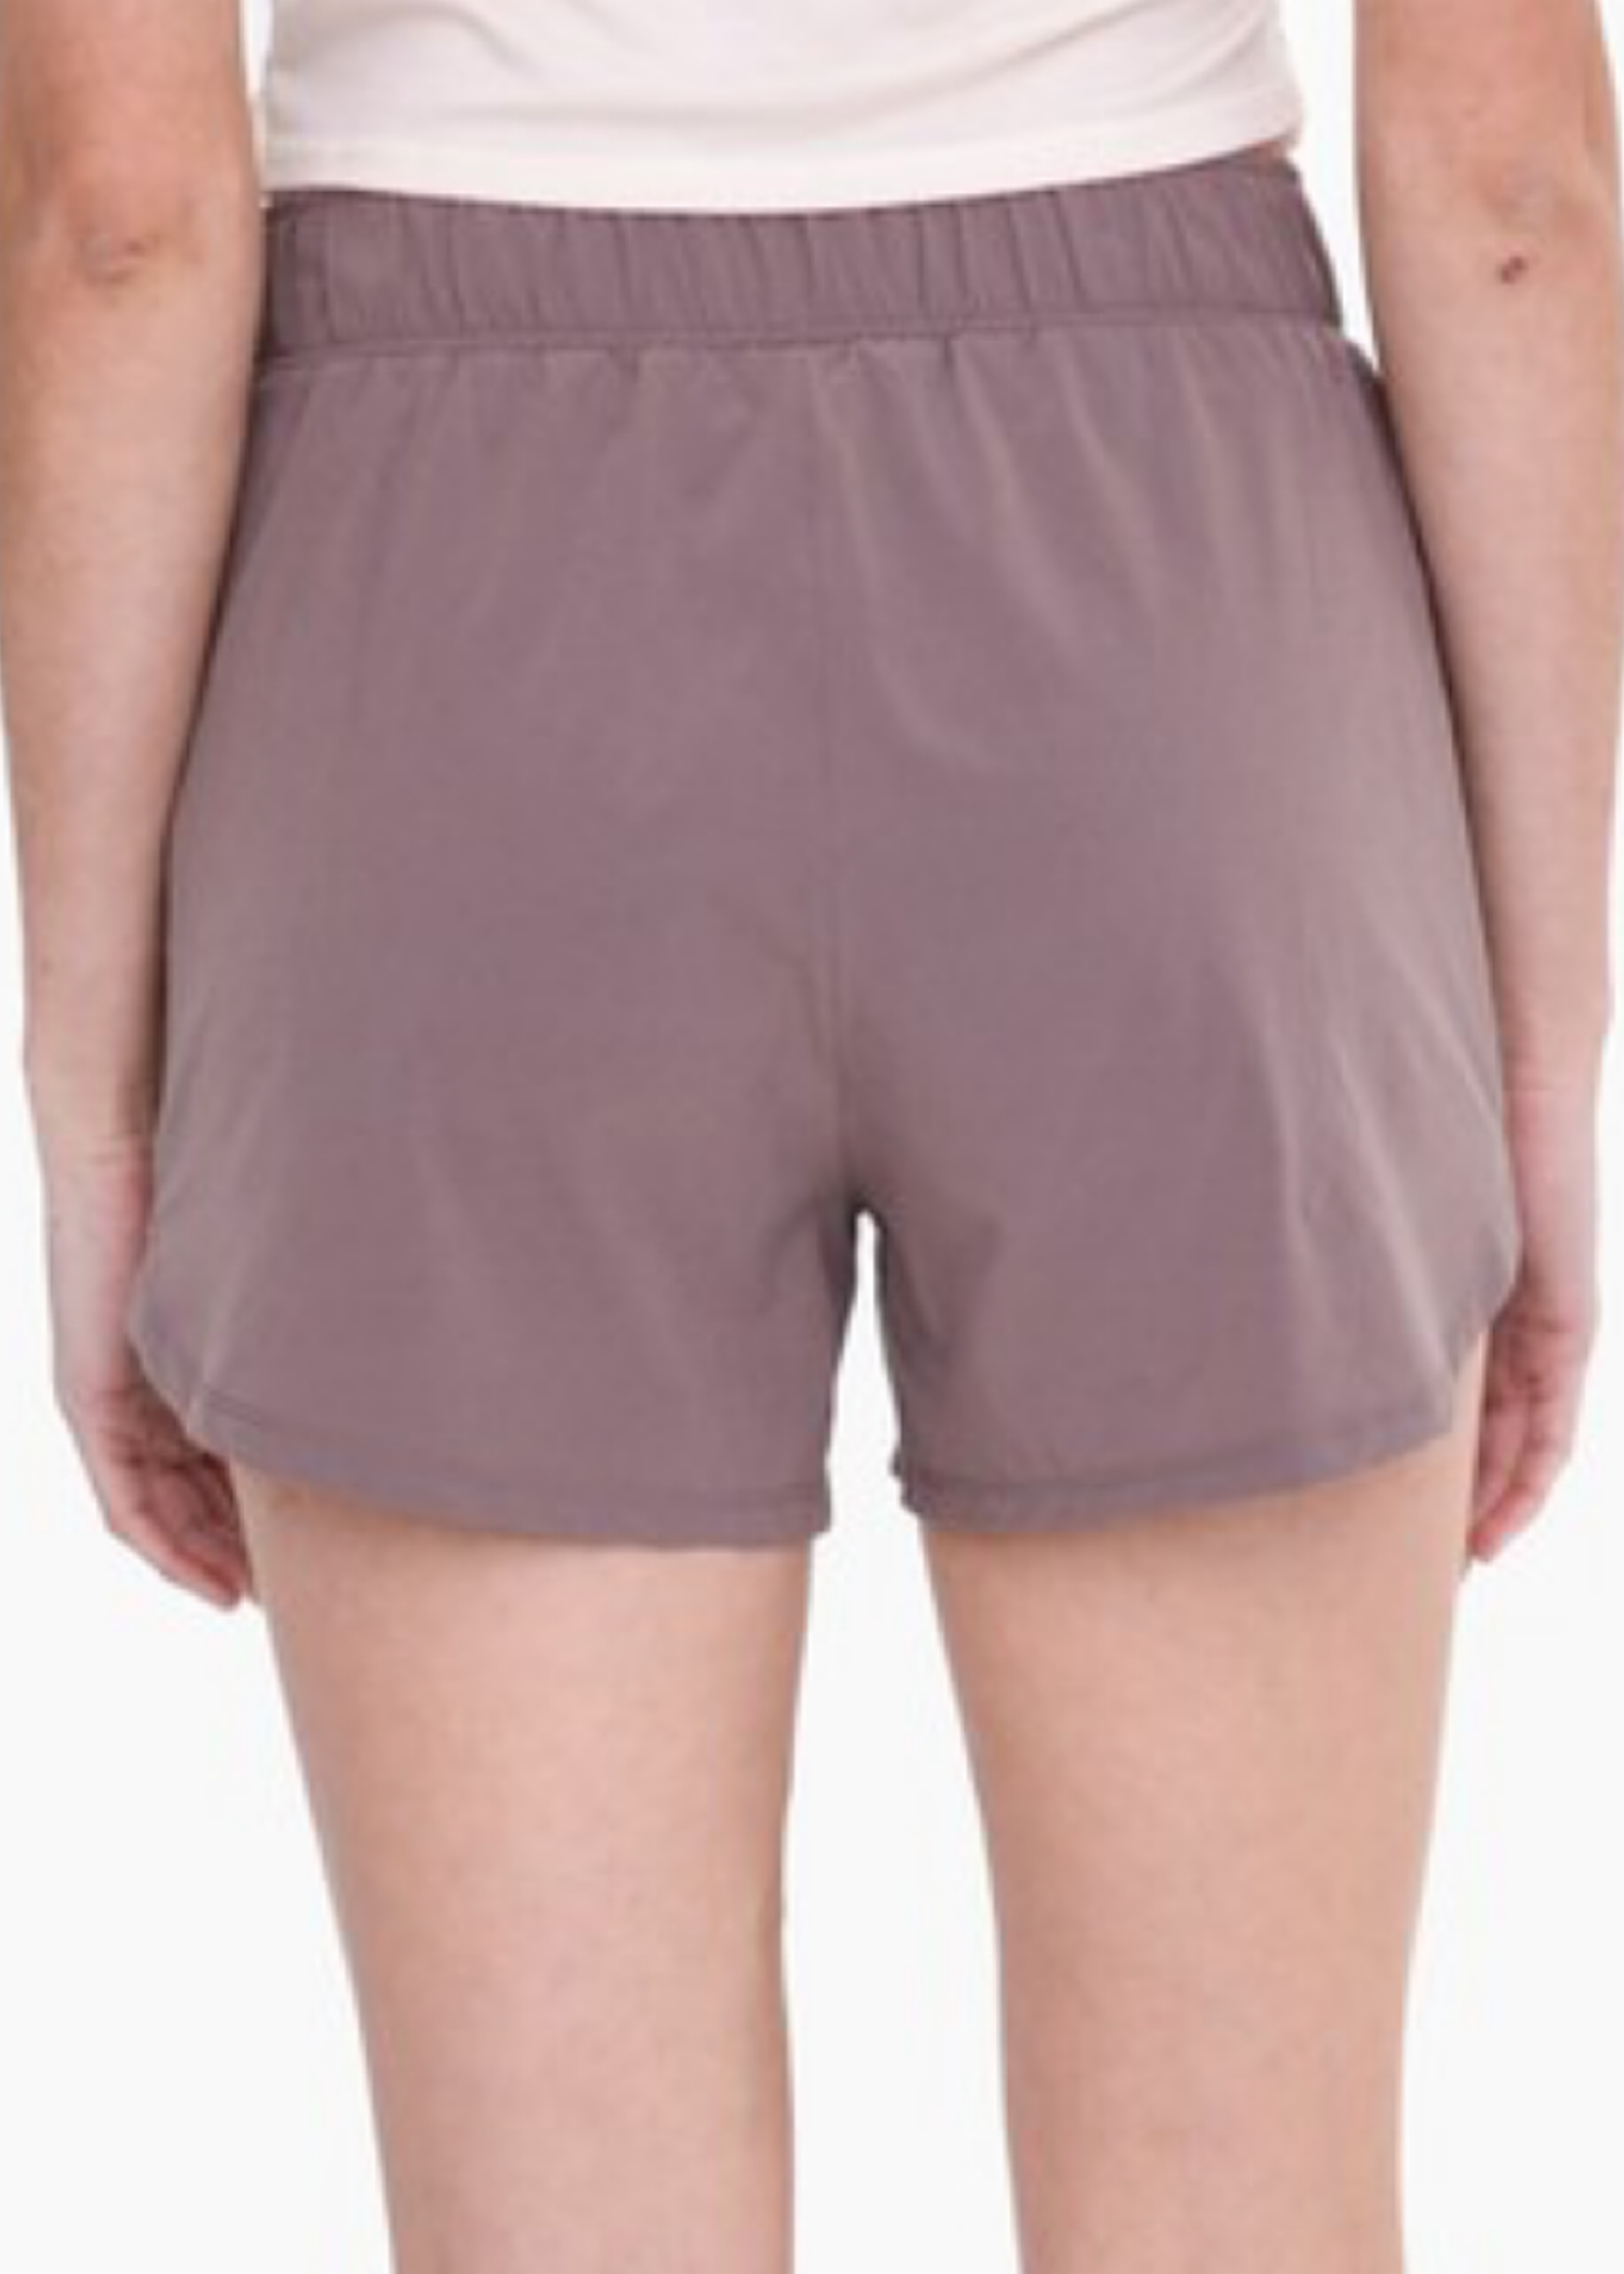 Light Cocoa Athleisure Shorts with Curved Hemline